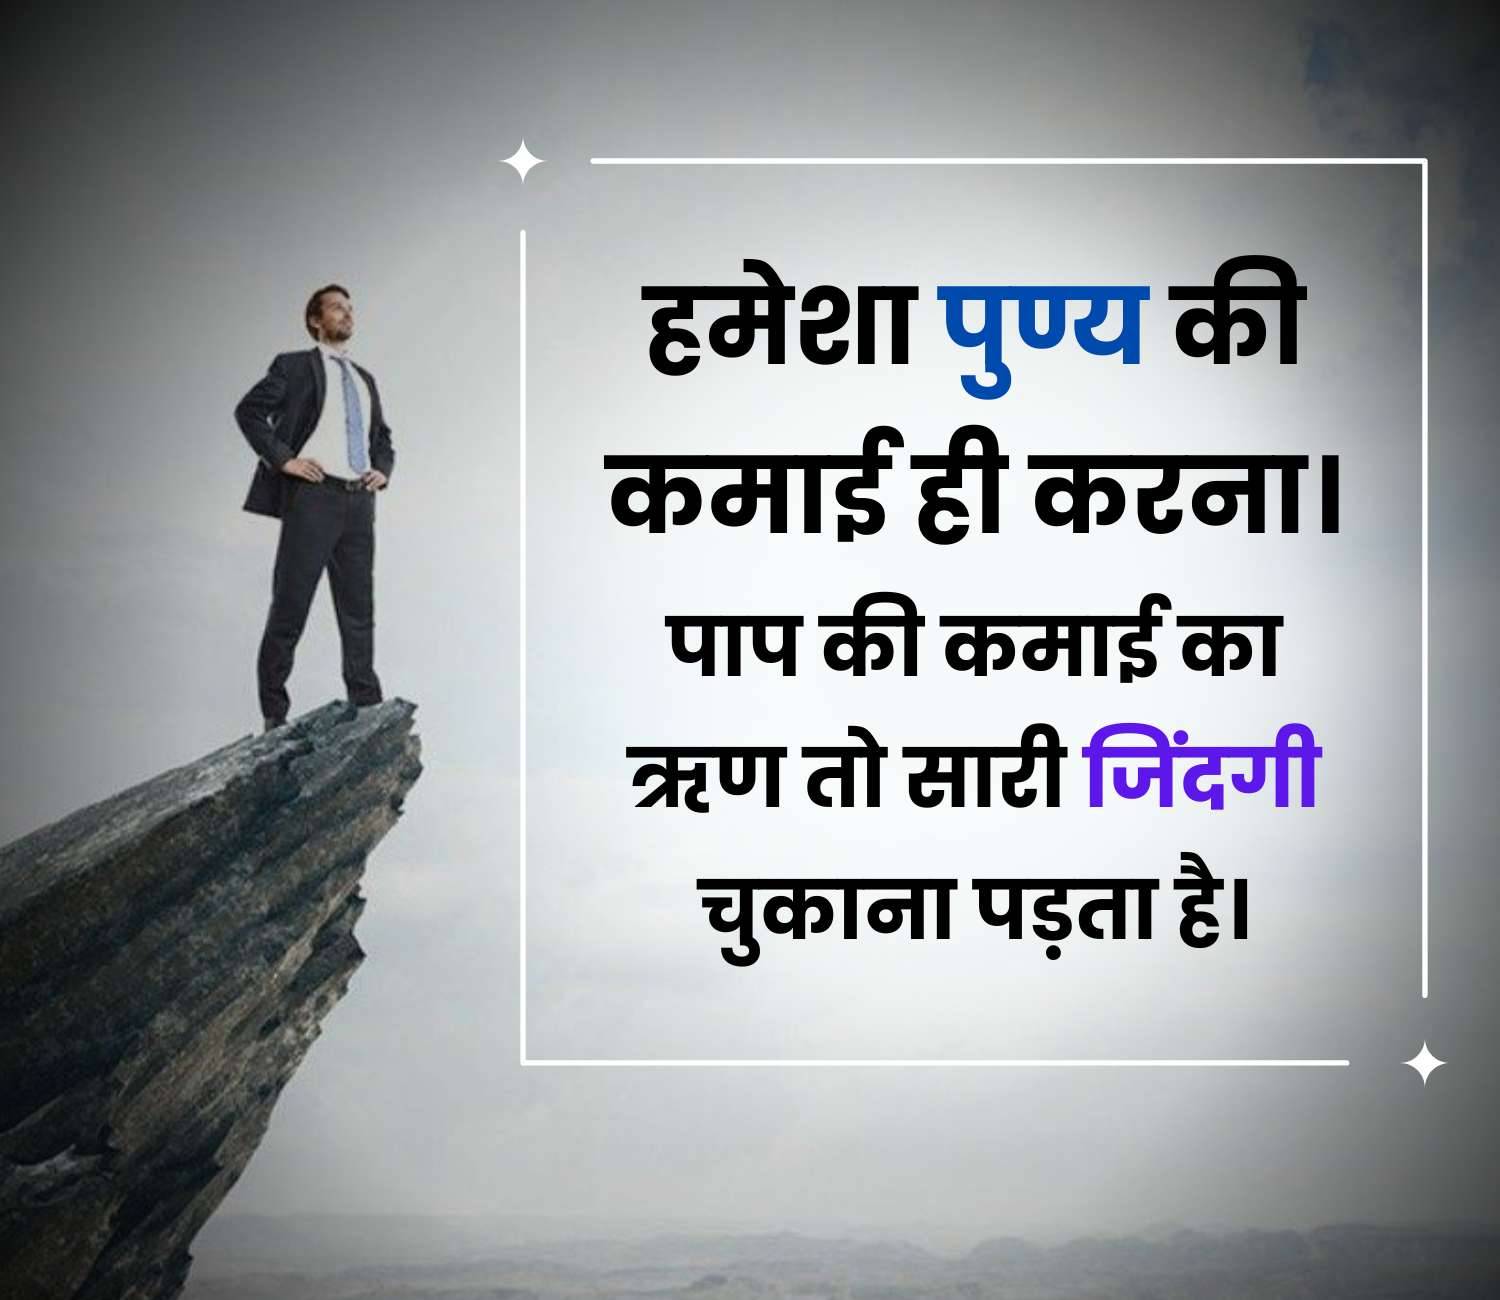 Motivational Quote Image in Hindi